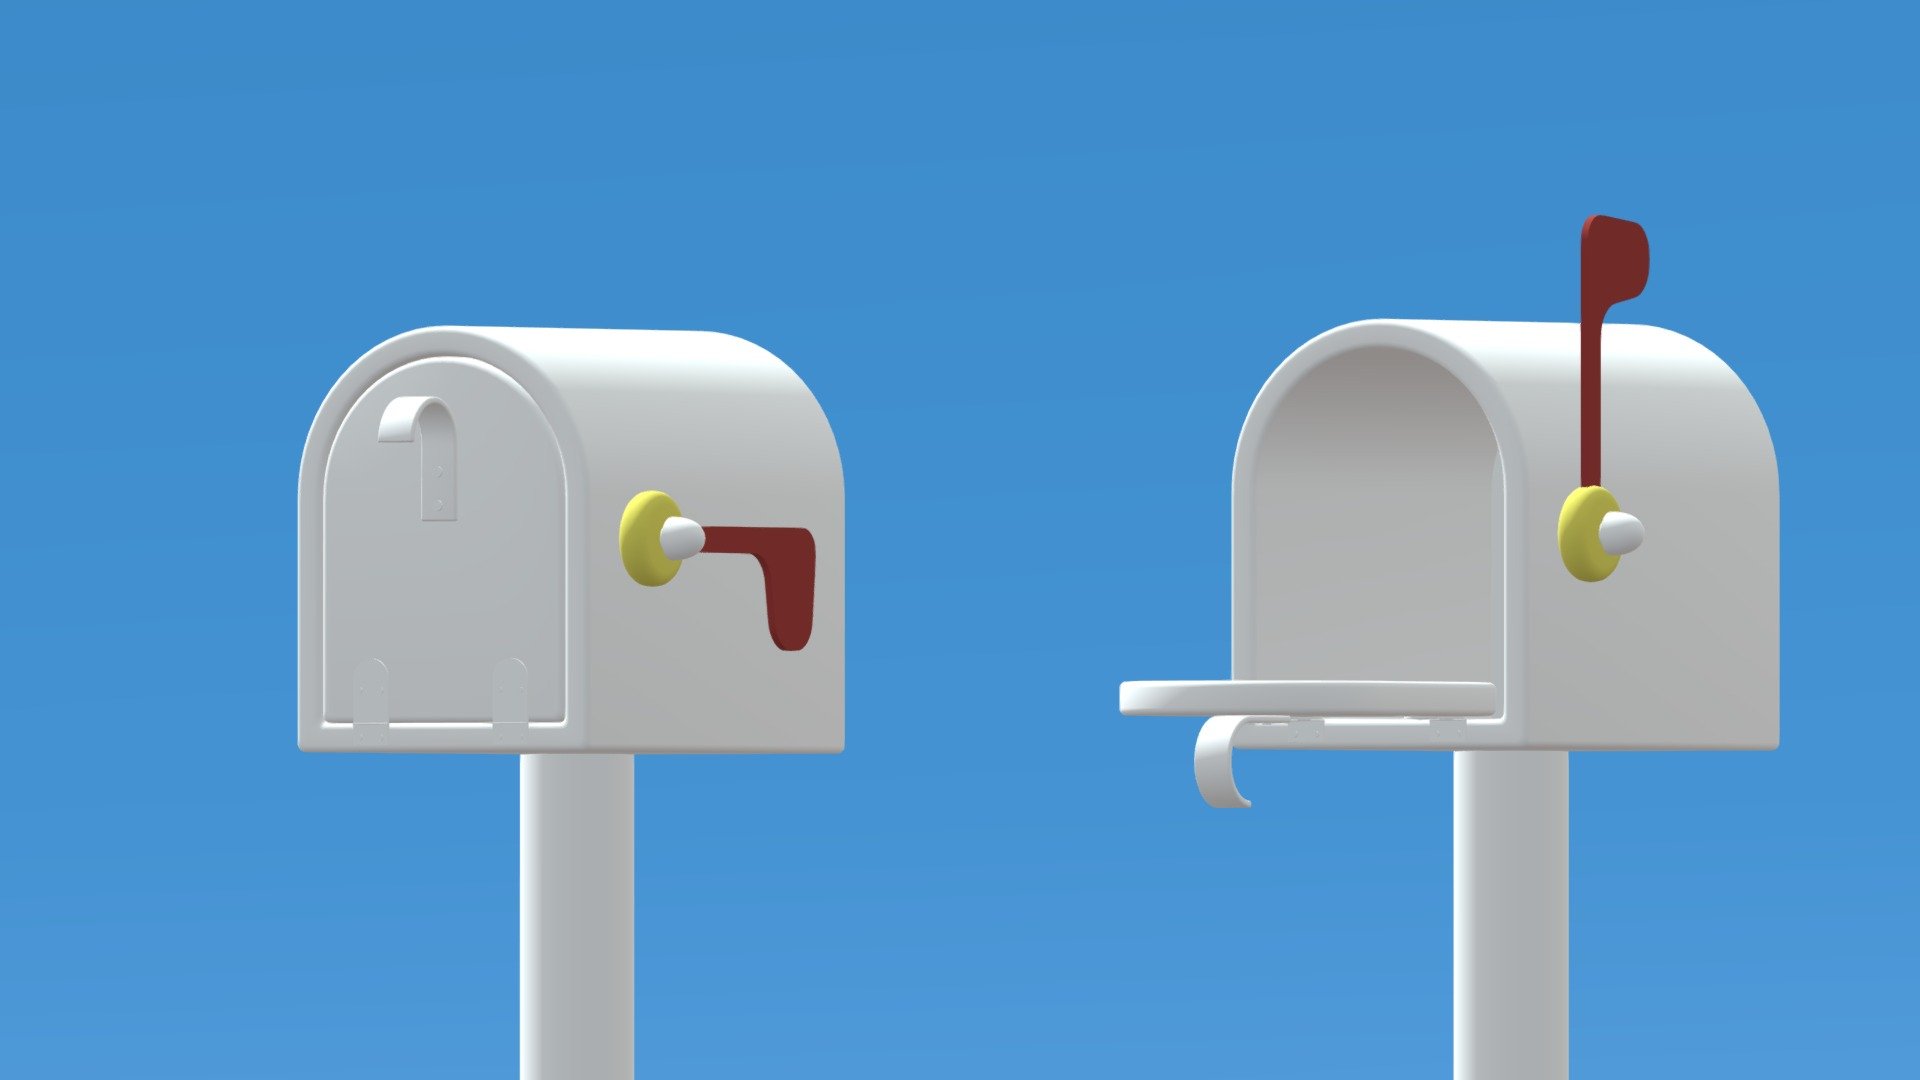 -Lovely Cartoon Mailbox.

-This product contains 6 models.

-This product was created in Blender 2.8.

-vertices: 3,671, polygons: 2,916.

-Formats: blend, fbx, obj, c4d, dae, fbx,unity.

-We hope you enjoy this model.

-Thank you 3d model